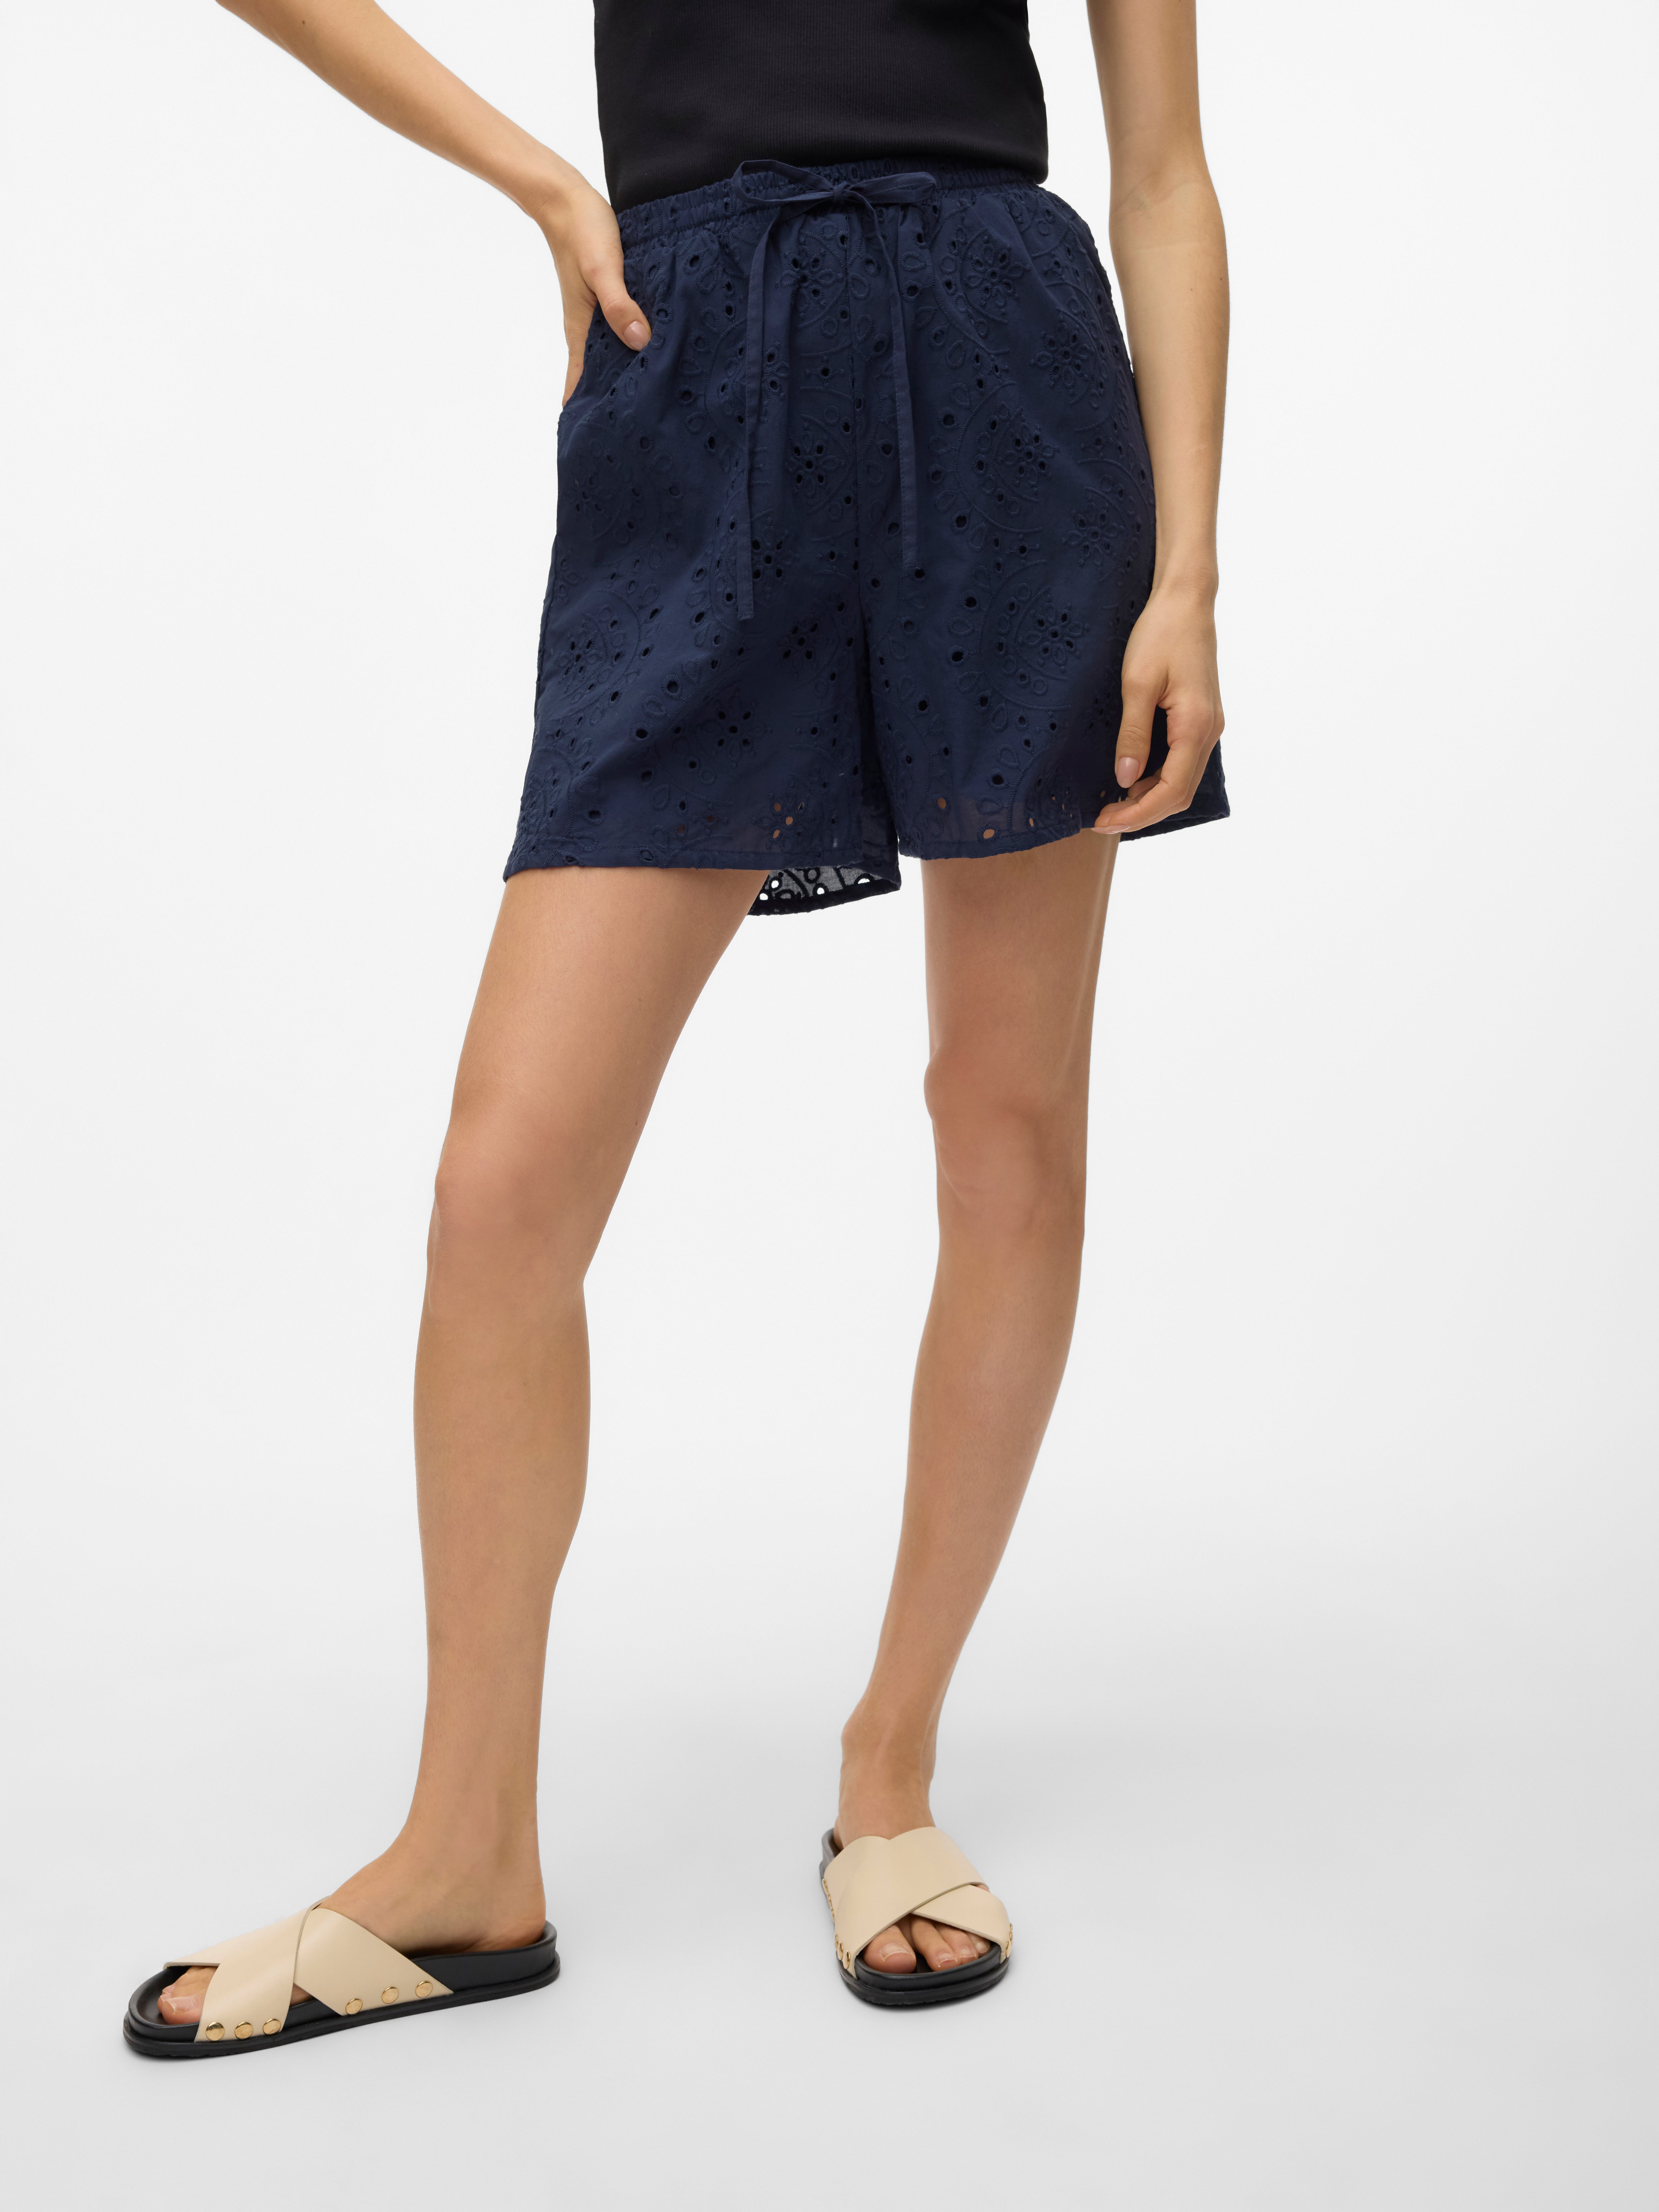 Women's Co-ords | Two piece sets & matching styles | VERO MODA